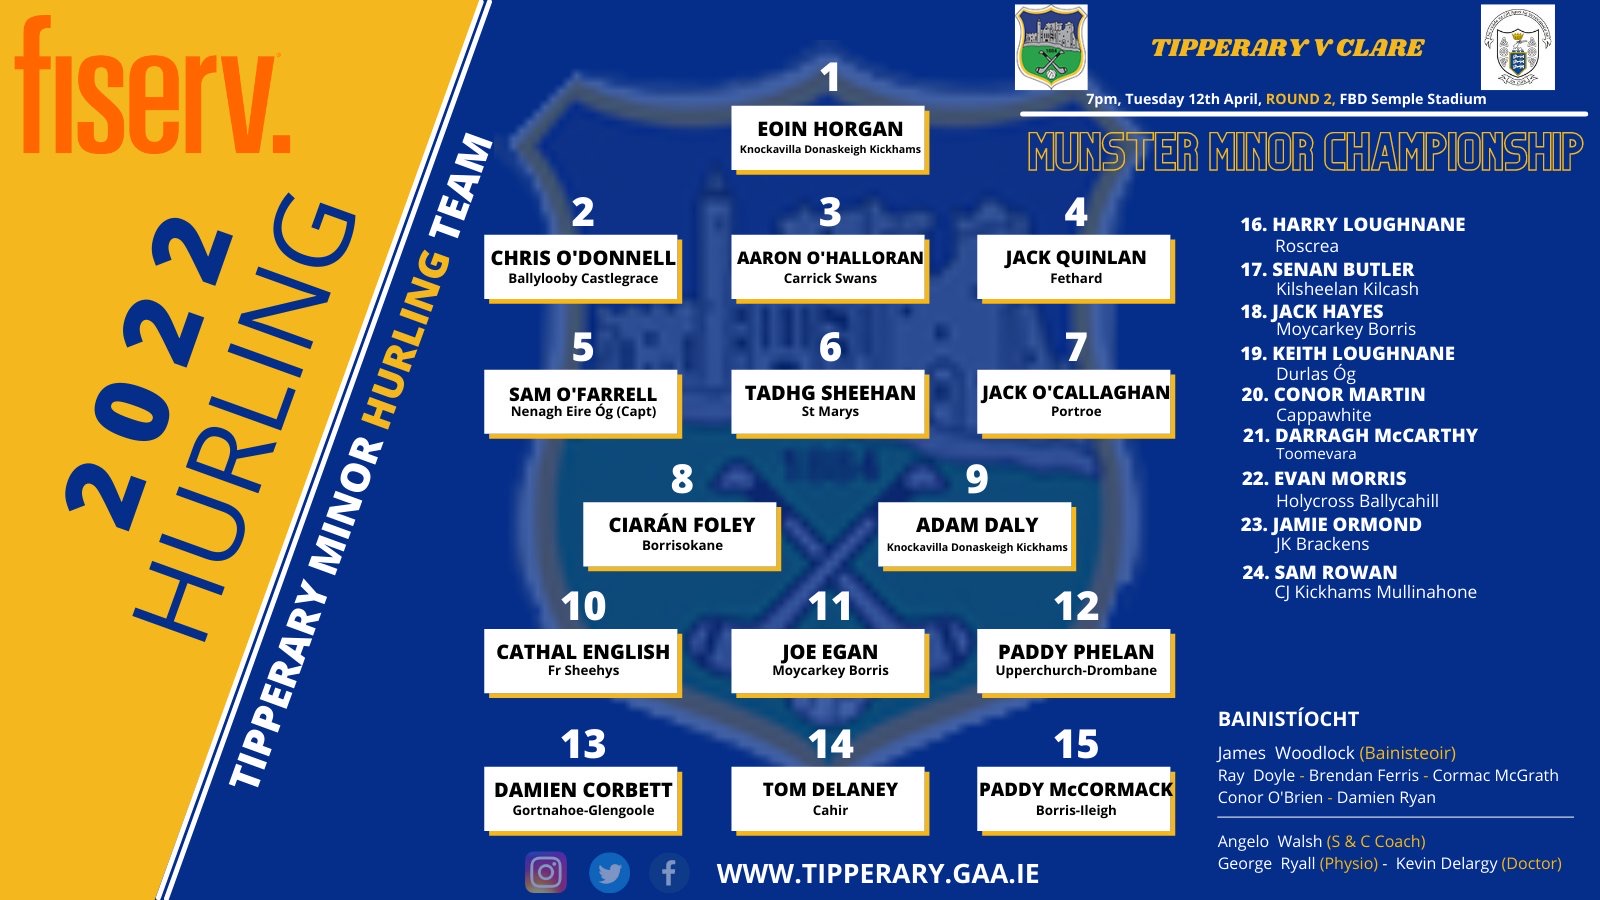 Photo from Tipperary GAA